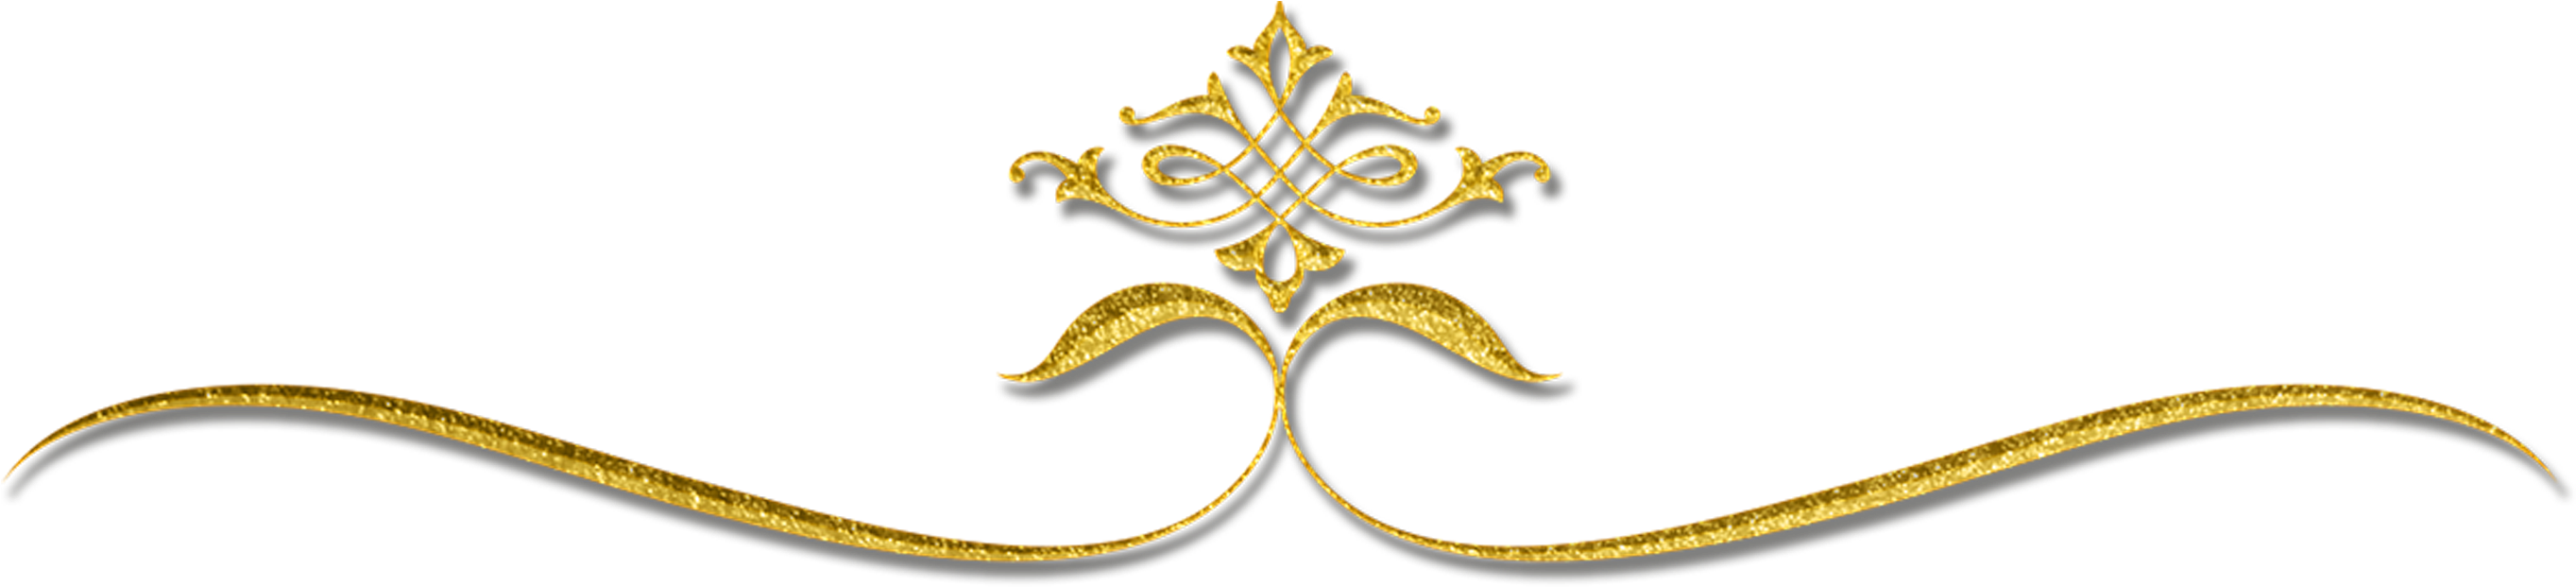 Wedding Designs Png - Imperial Design Png (2861x770), Png Download